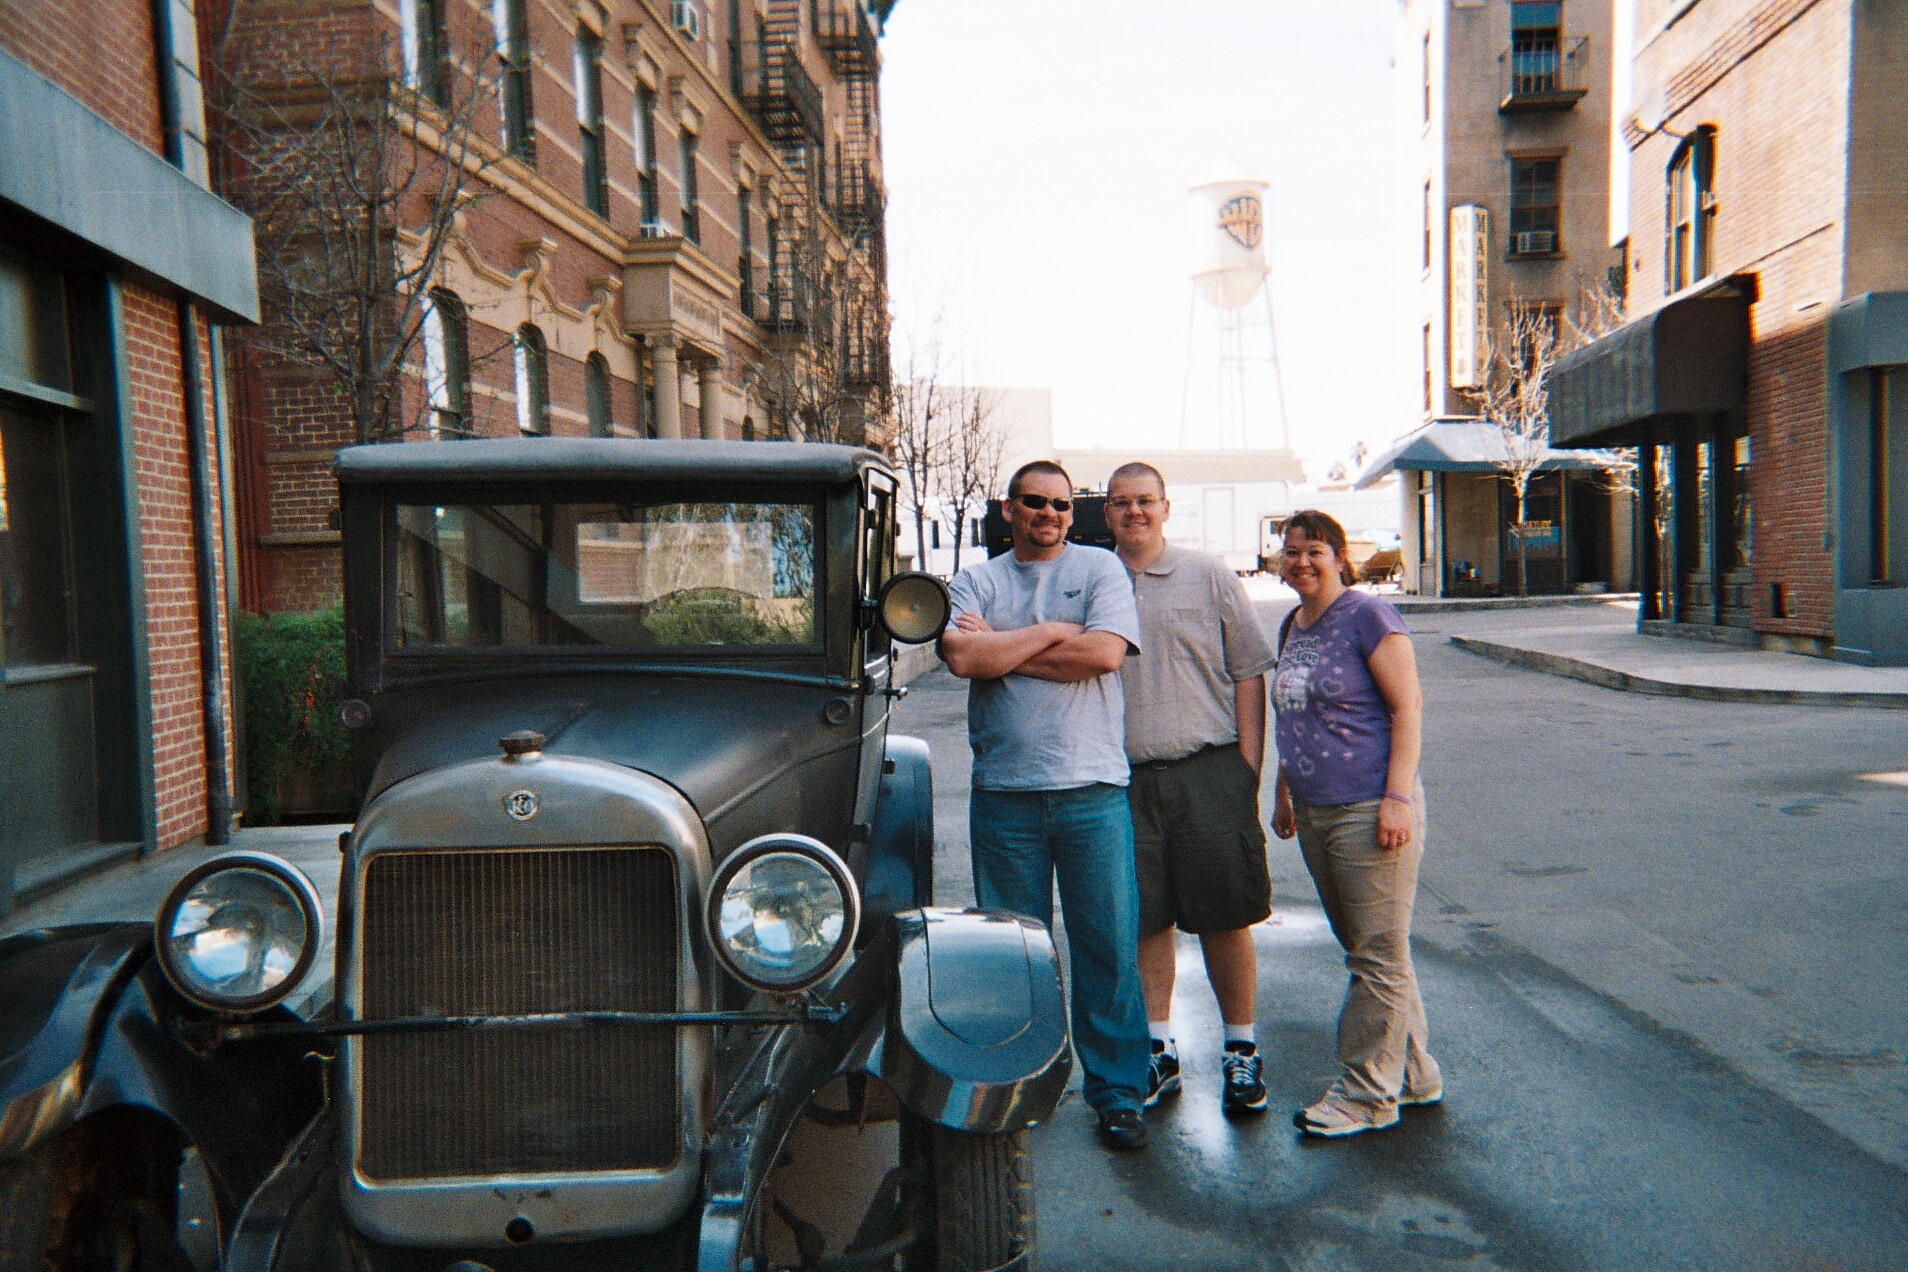 Candy, Mark and Daniel Beard on the Warner Brother's Studios outside the building where the Clint Eastwood film, 